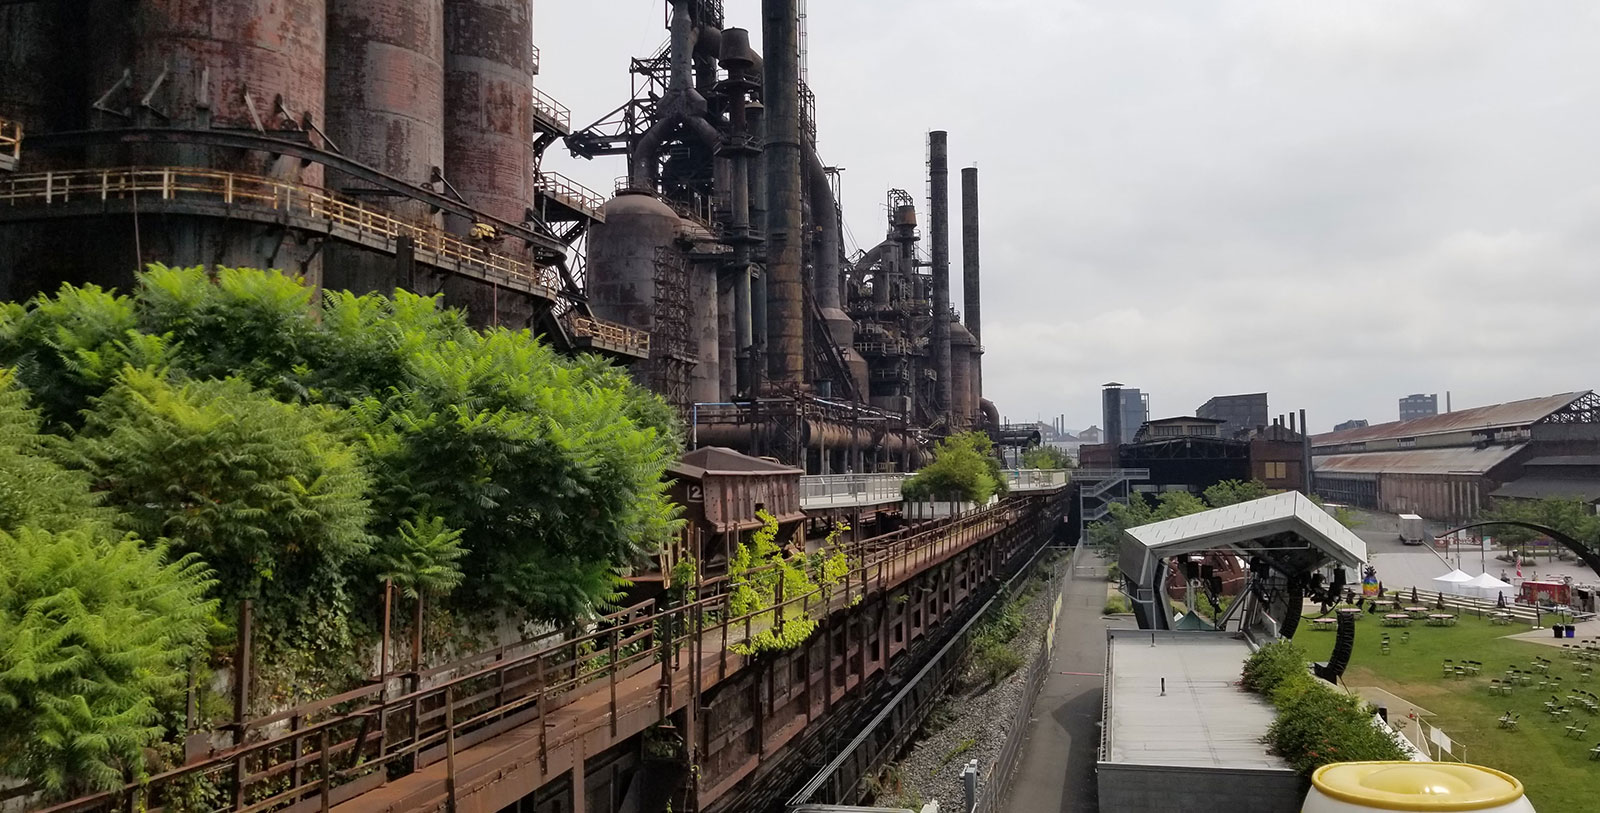 Explore SteelStacks, the repurposed Bethlehem Steel plant, which now houses arts, educational, and musical events year-round.